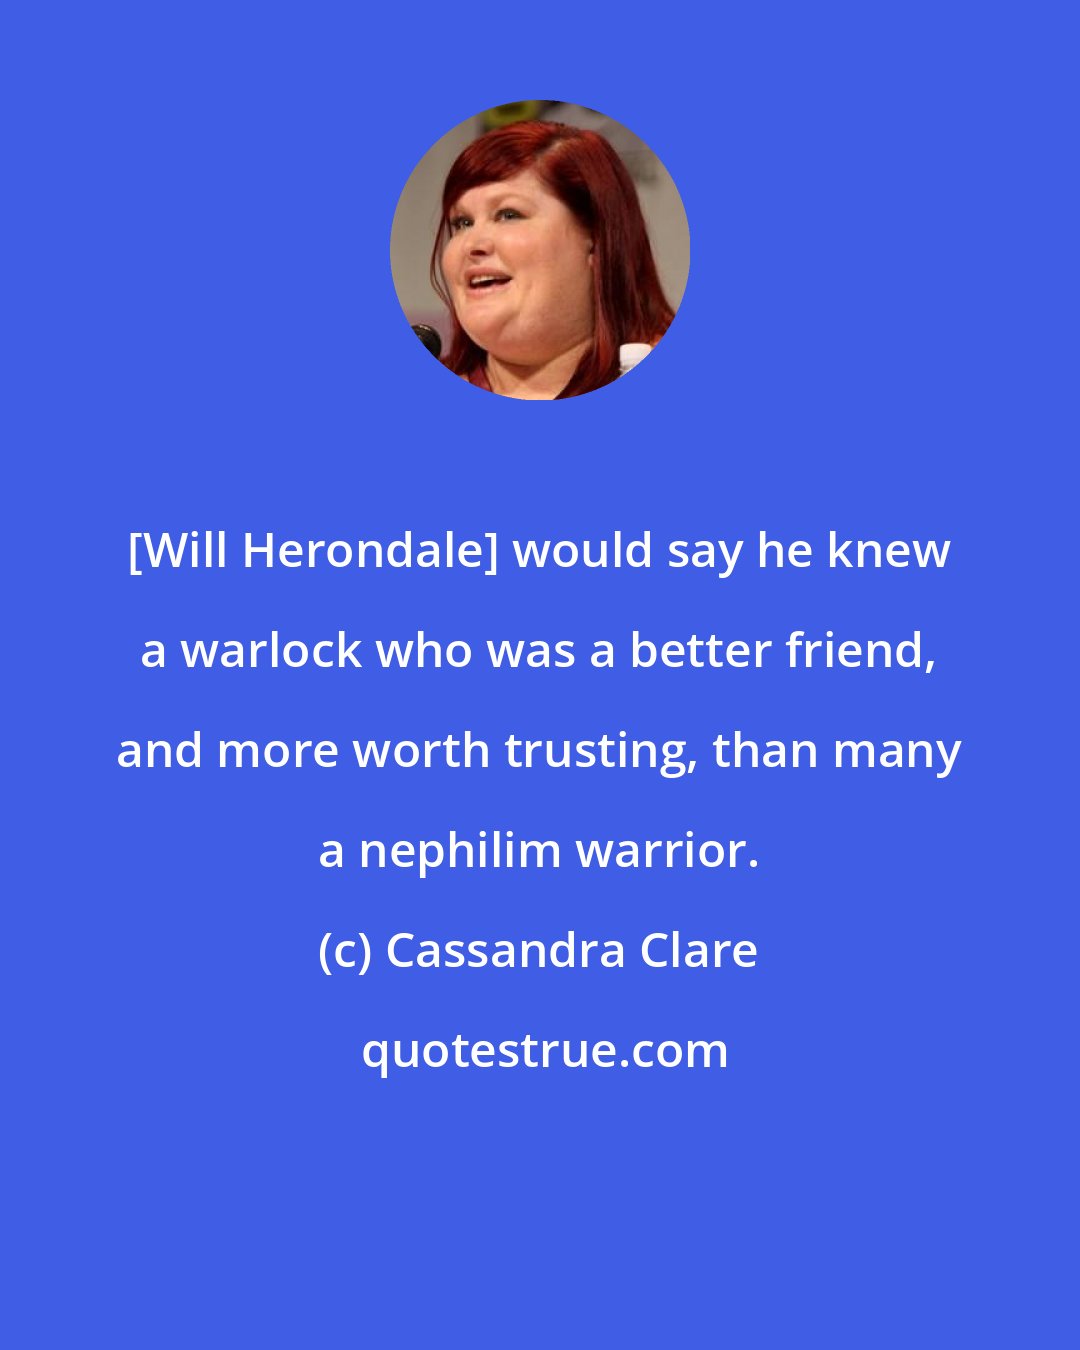 Cassandra Clare: [Will Herondale] would say he knew a warlock who was a better friend, and more worth trusting, than many a nephilim warrior.